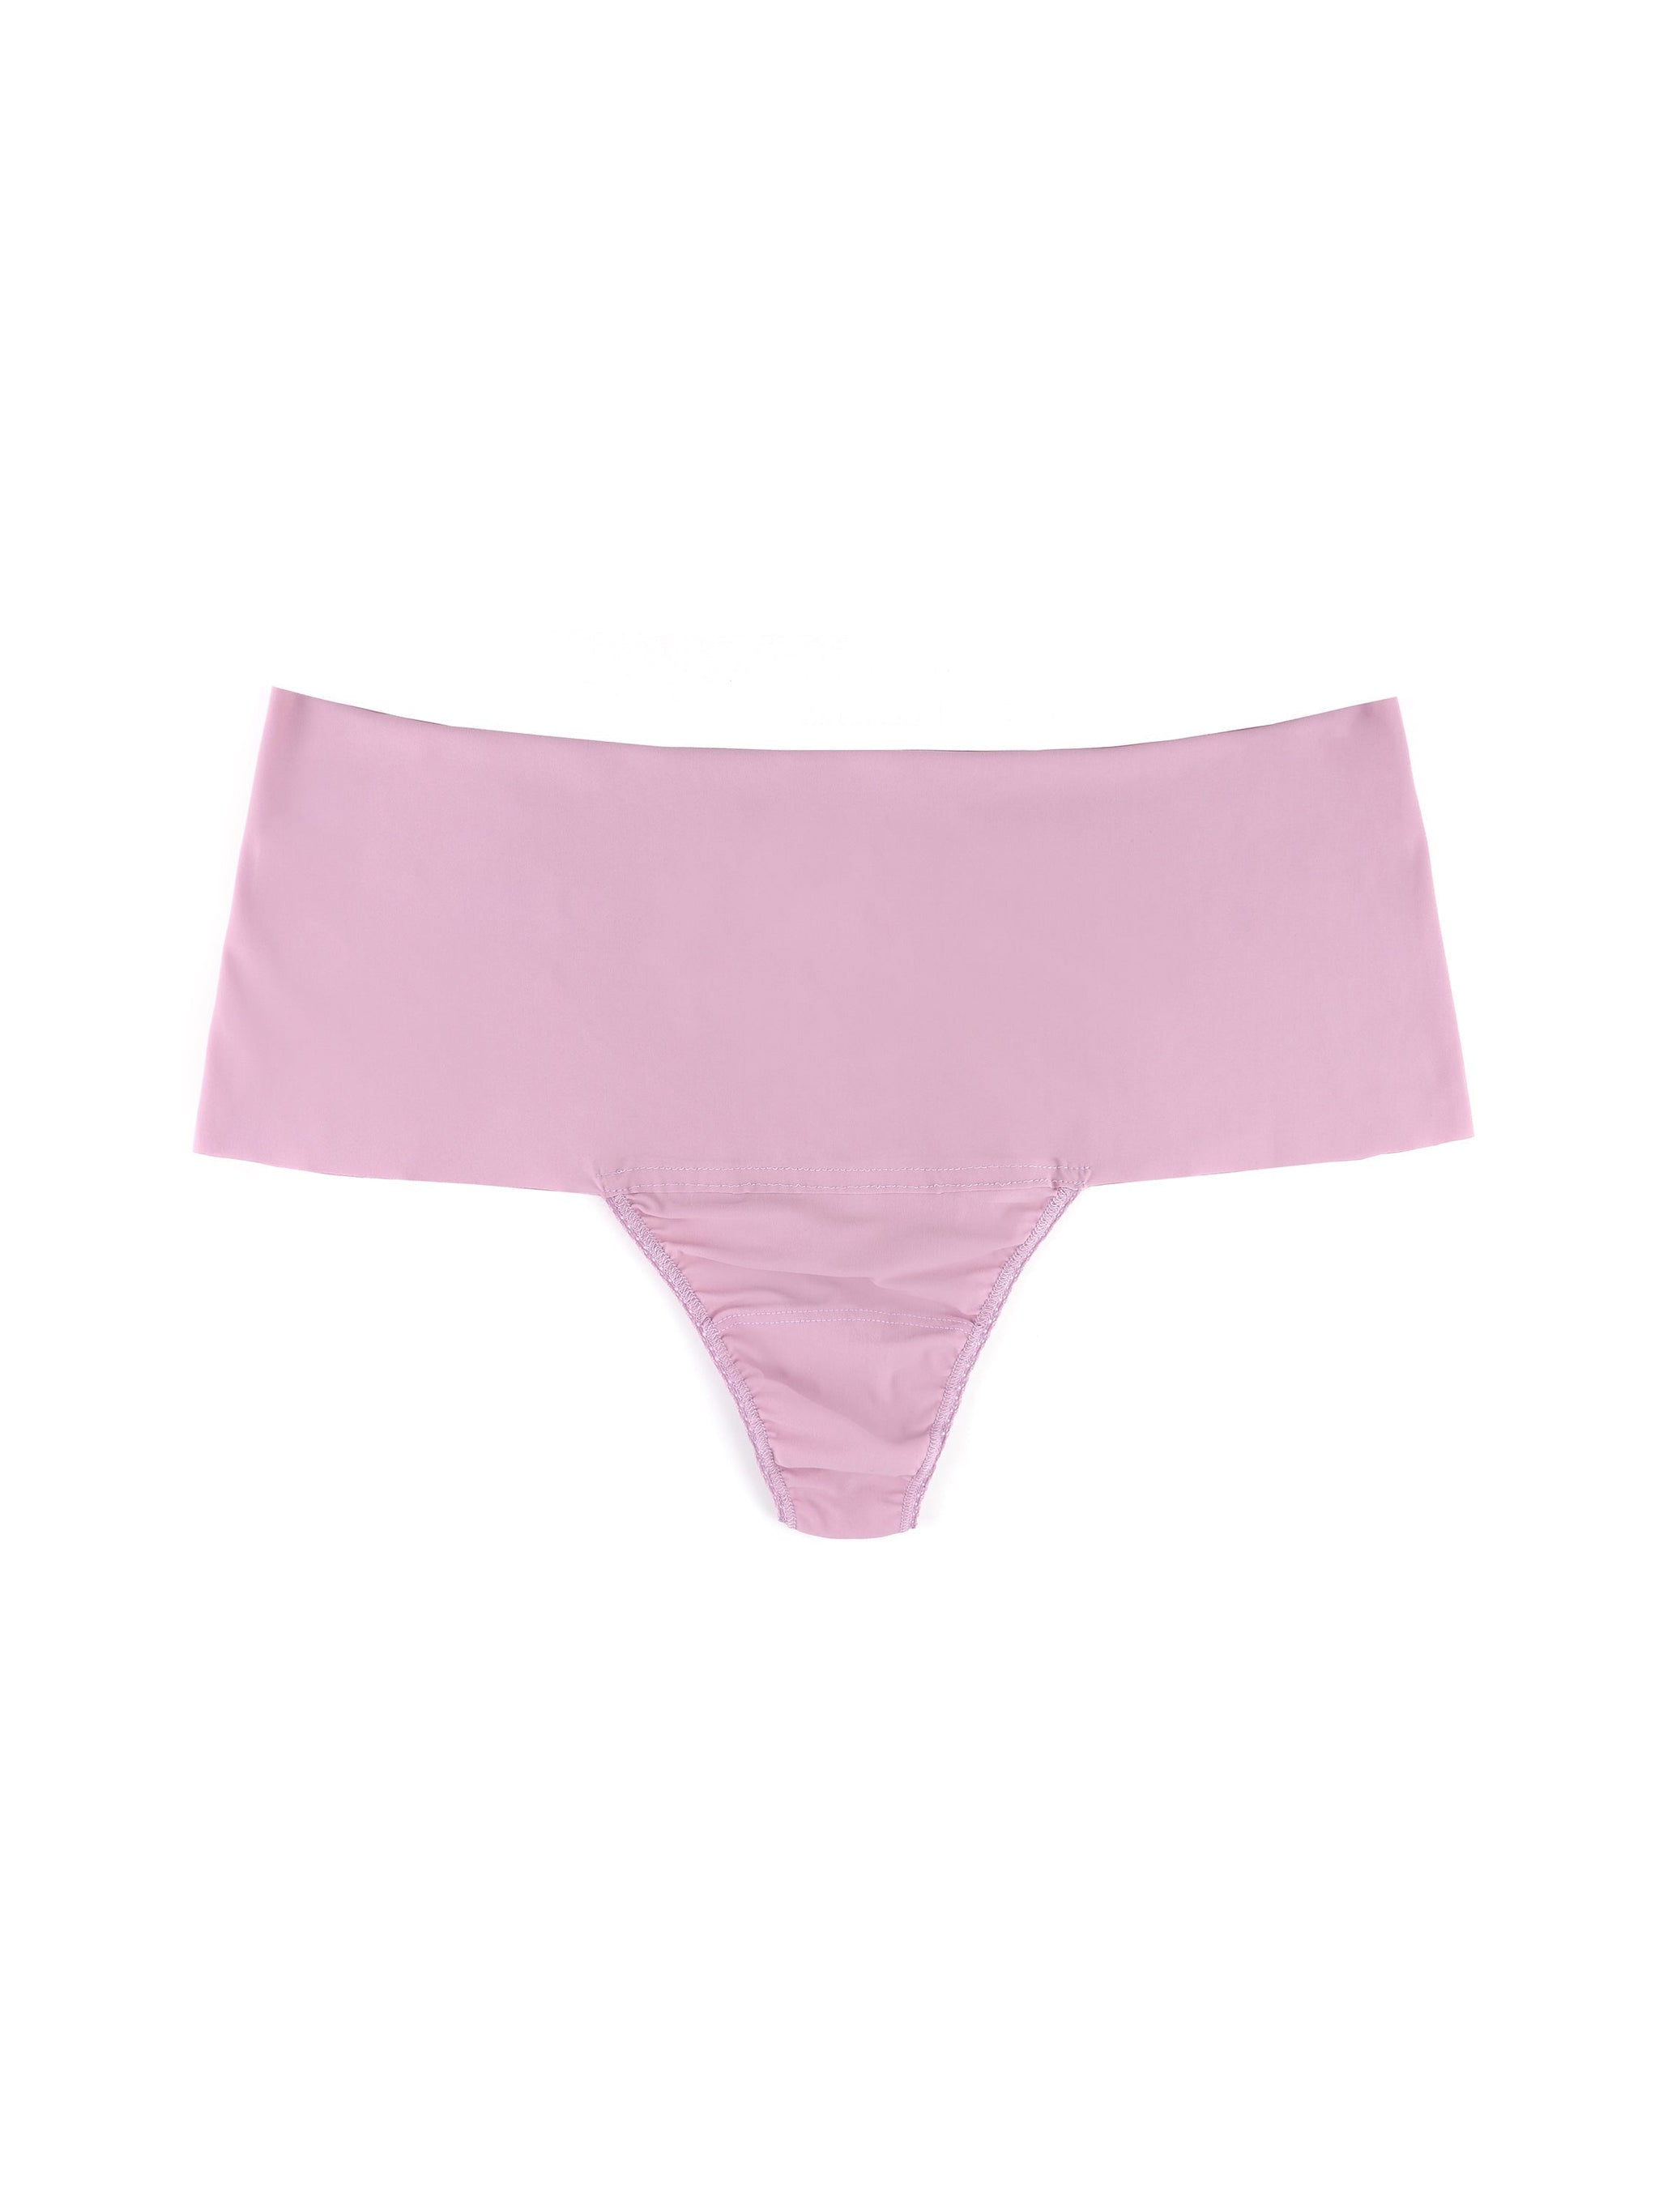 Plus Size Breathe Hi-Rise Thong Exclusive-PROVENCE PINK-Hanky Panky